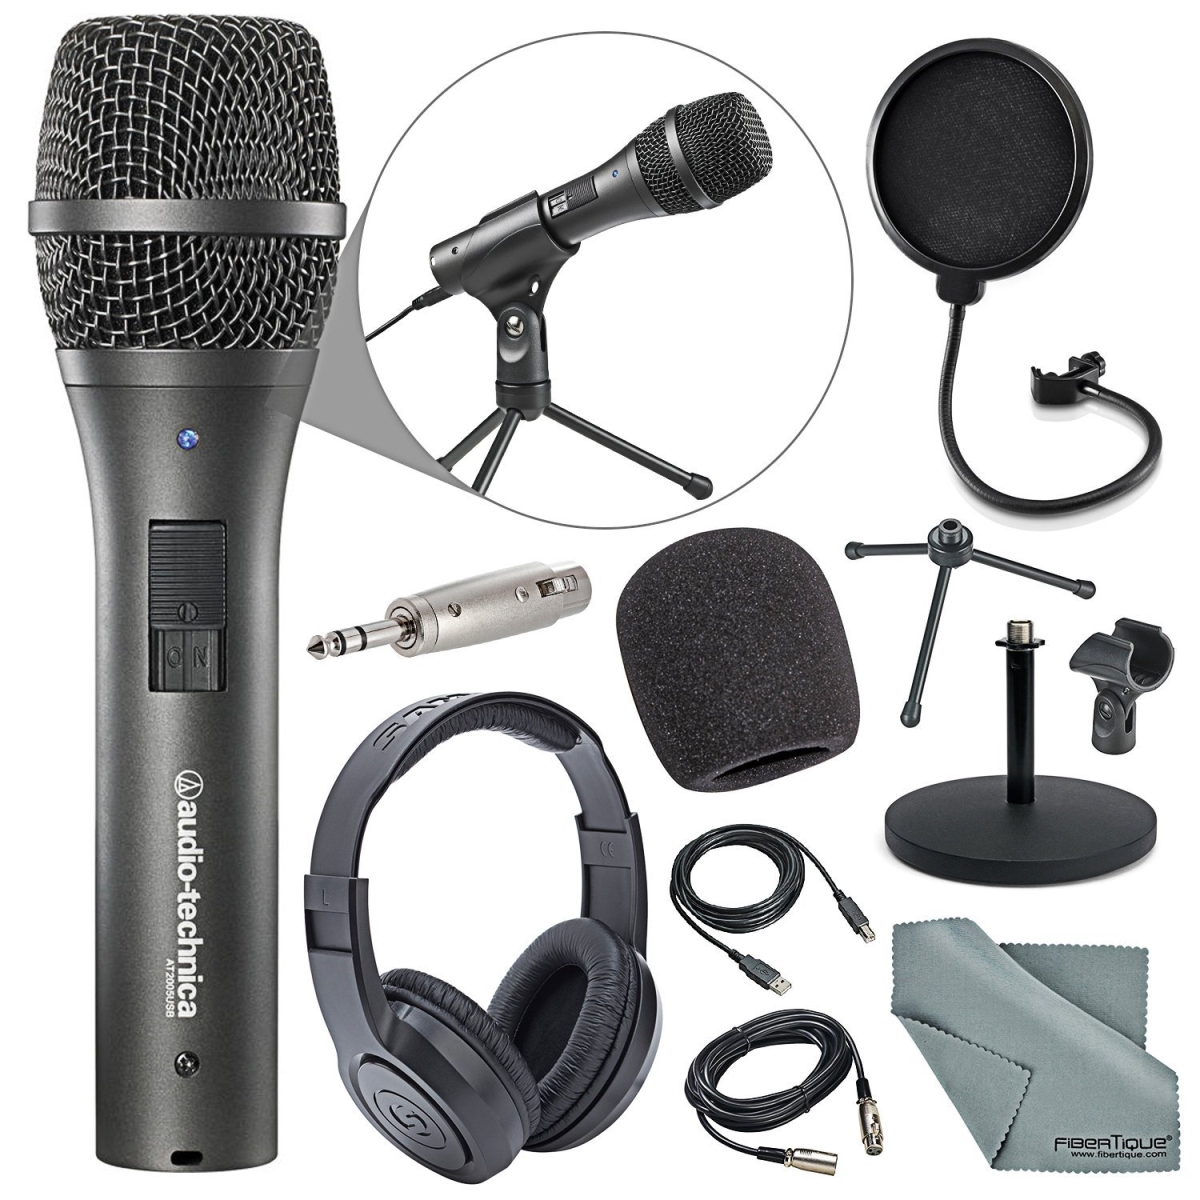 Picture of Audio-Technica AUDIO-TECHNICA-AT2005USB-D-KIT920-NFBA Cardioid Dynamic USB & XLR Microphone Podcasting Kit with Over-Ear Headphone